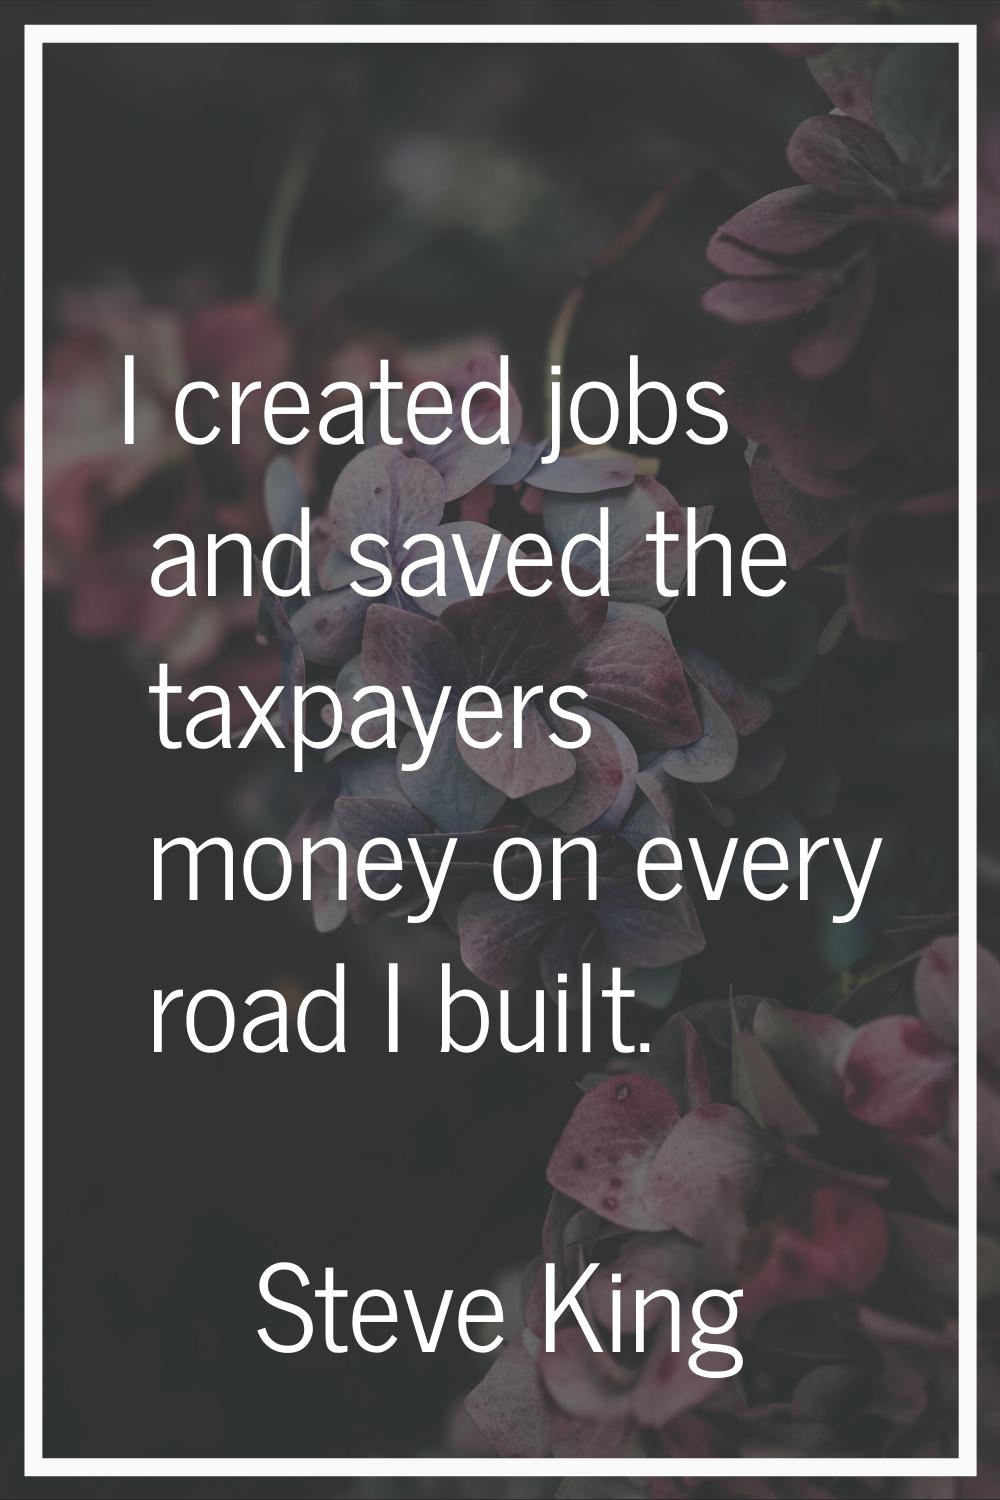 I created jobs and saved the taxpayers money on every road I built.